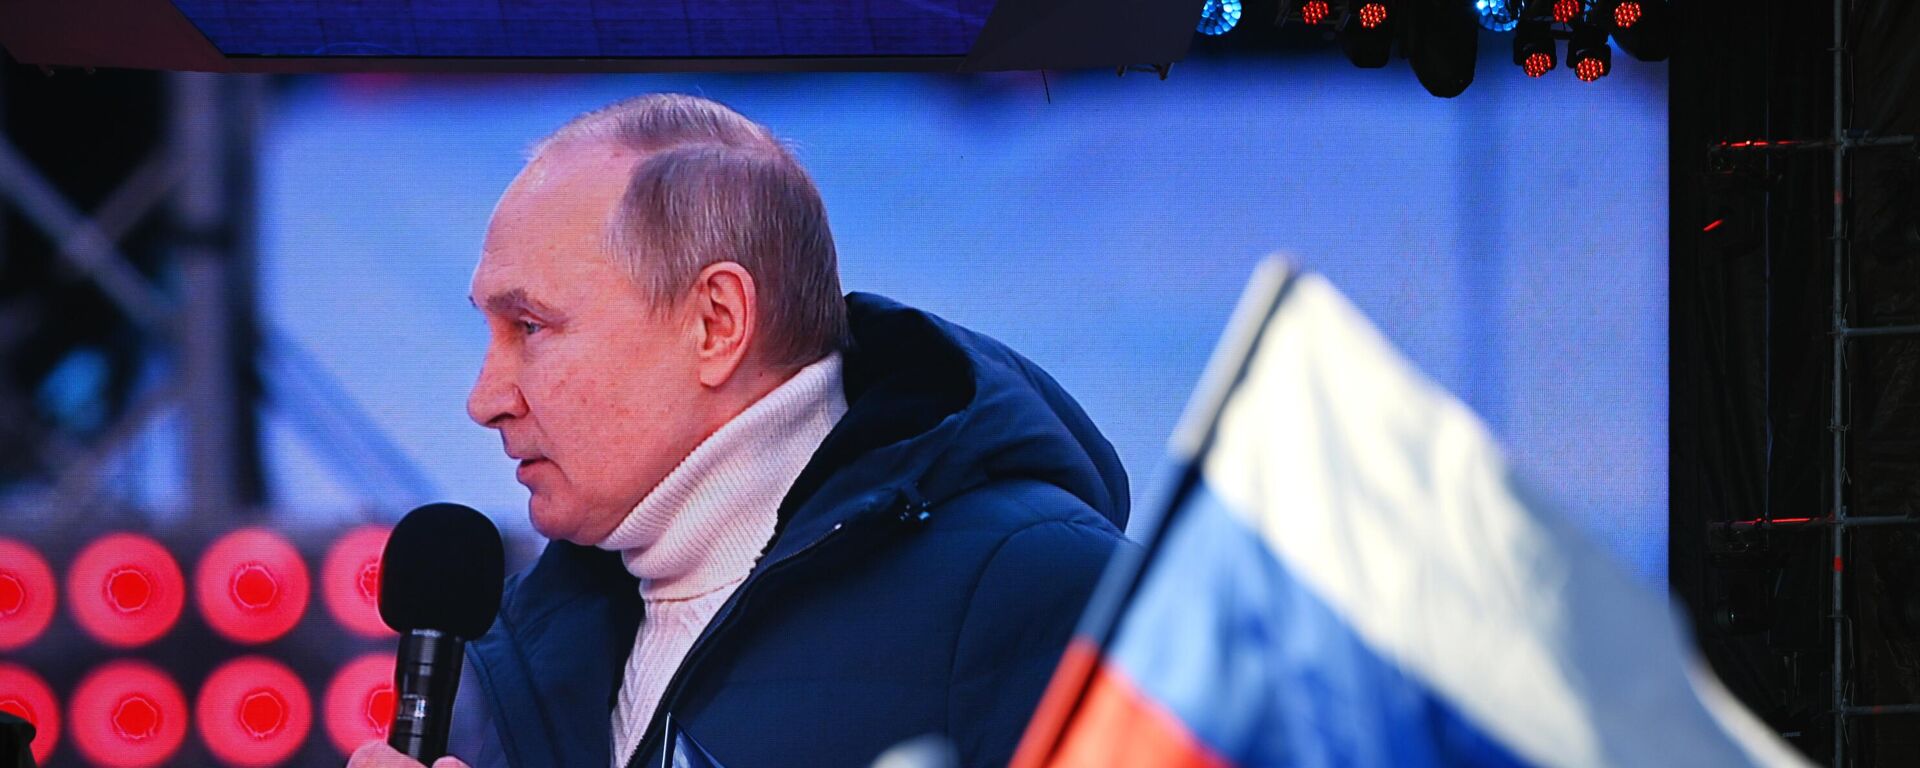 Russian President Vladimir Putin at the concert dedicated to the celebration of the unification of Crimea with Russia in 2014 - Sputnik International, 1920, 18.03.2022